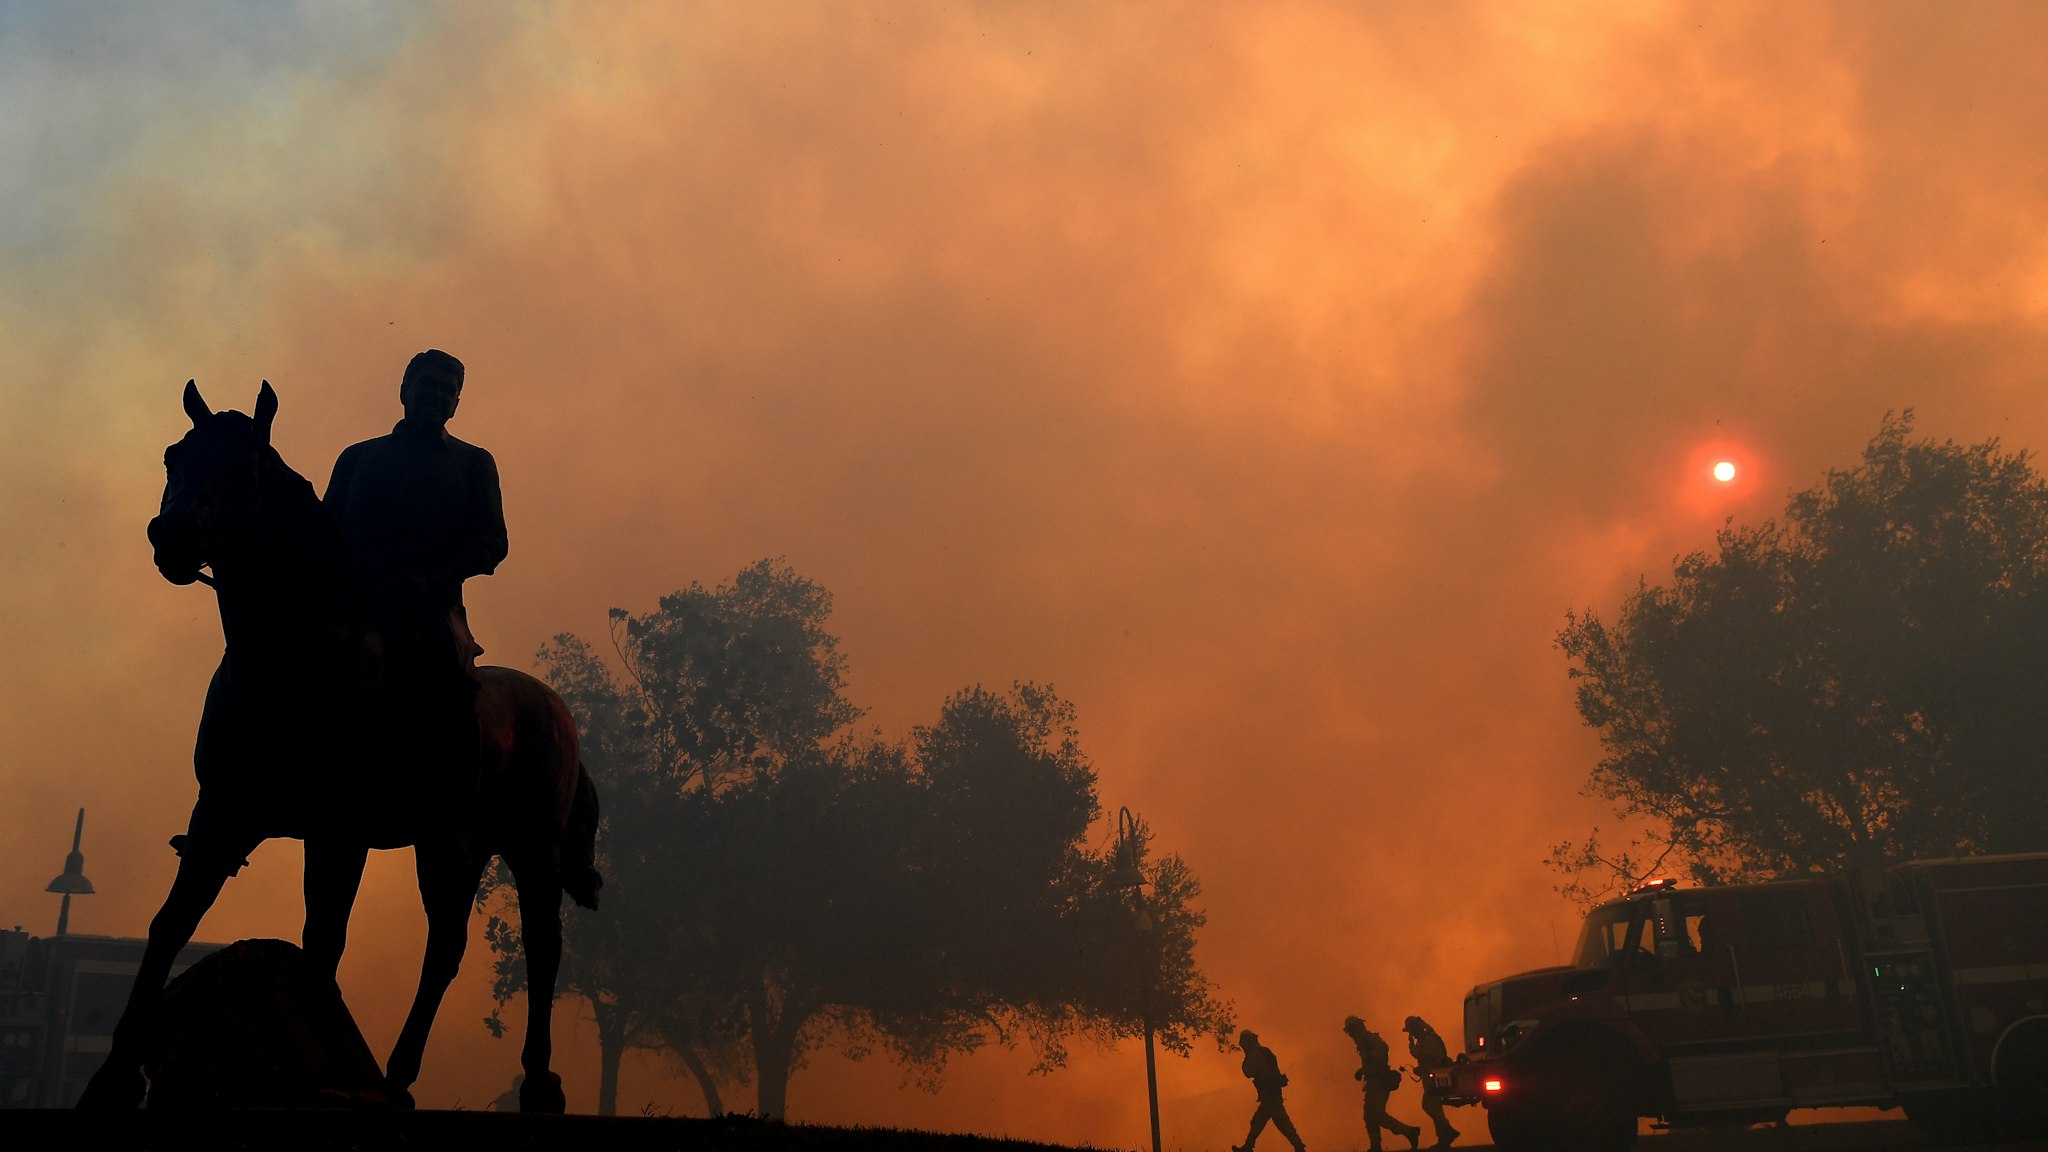 SIMI VALLEY, CALIFORNIA - OCTOBER 30: A statue of former U.S. President Ronald Reagan titled "Along The Trail" stands outside the Reagan Presidential Library as the Easy Fire burns on October 30, 2019 in Simi Valley, California. (Photo by Wally Skalij/Los Angeles Times via Getty Images)